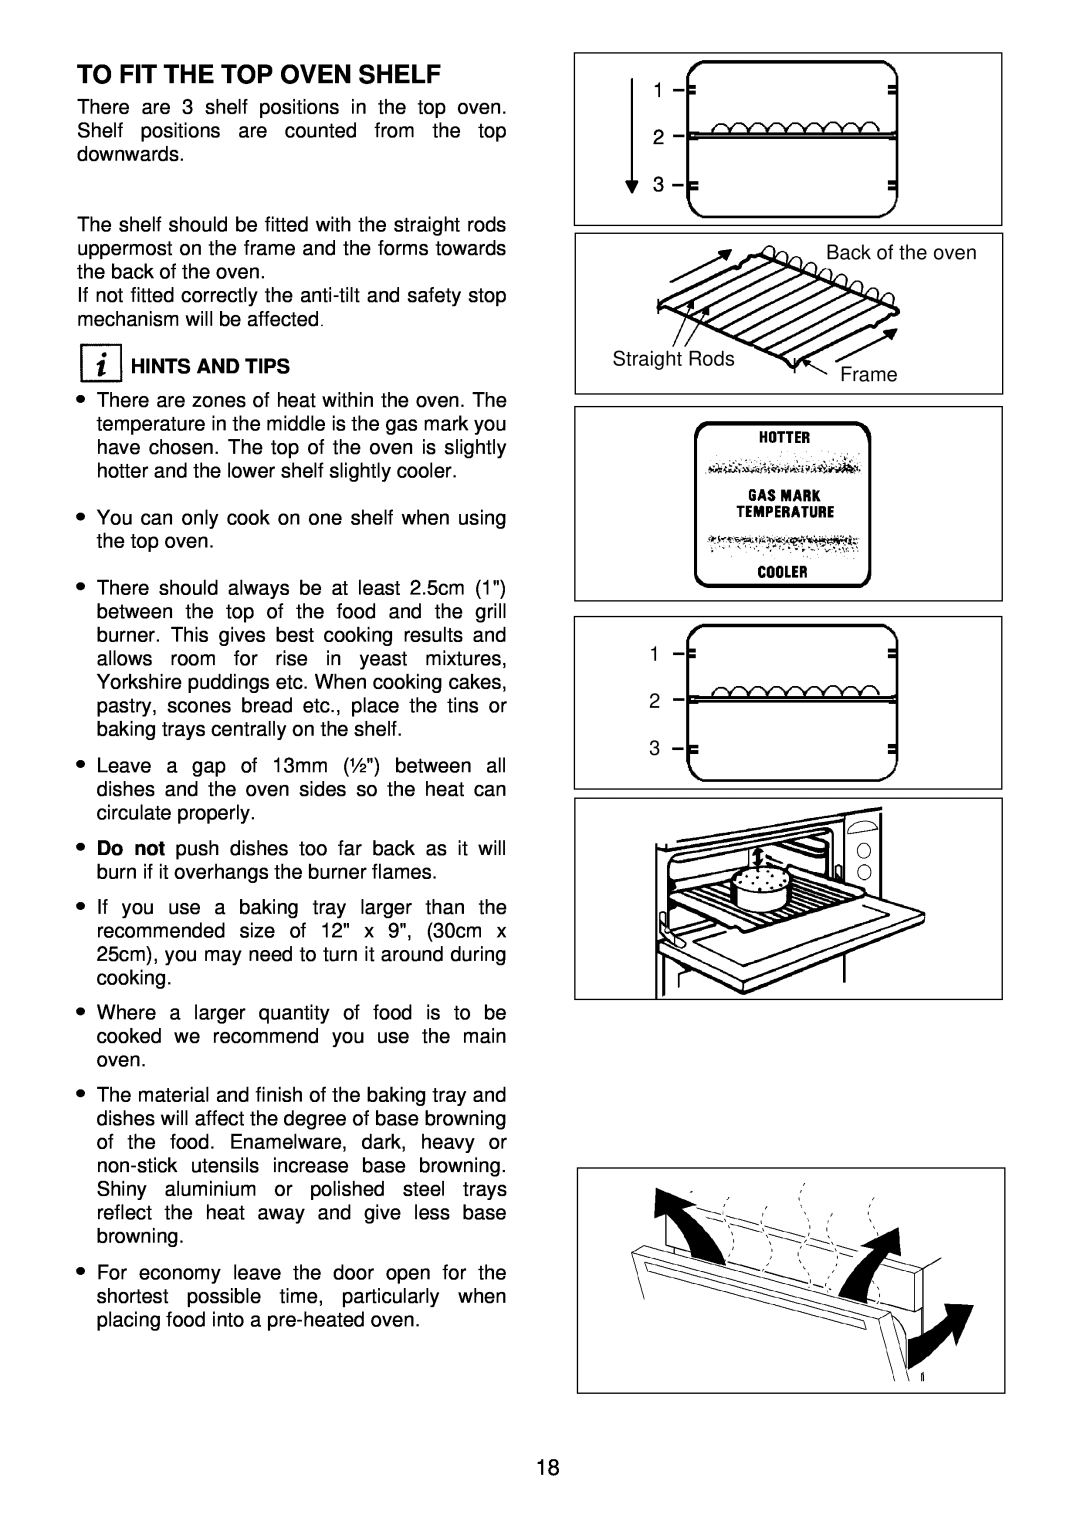 Electrolux EDB 876 manual To Fit The Top Oven Shelf, Hints And Tips 